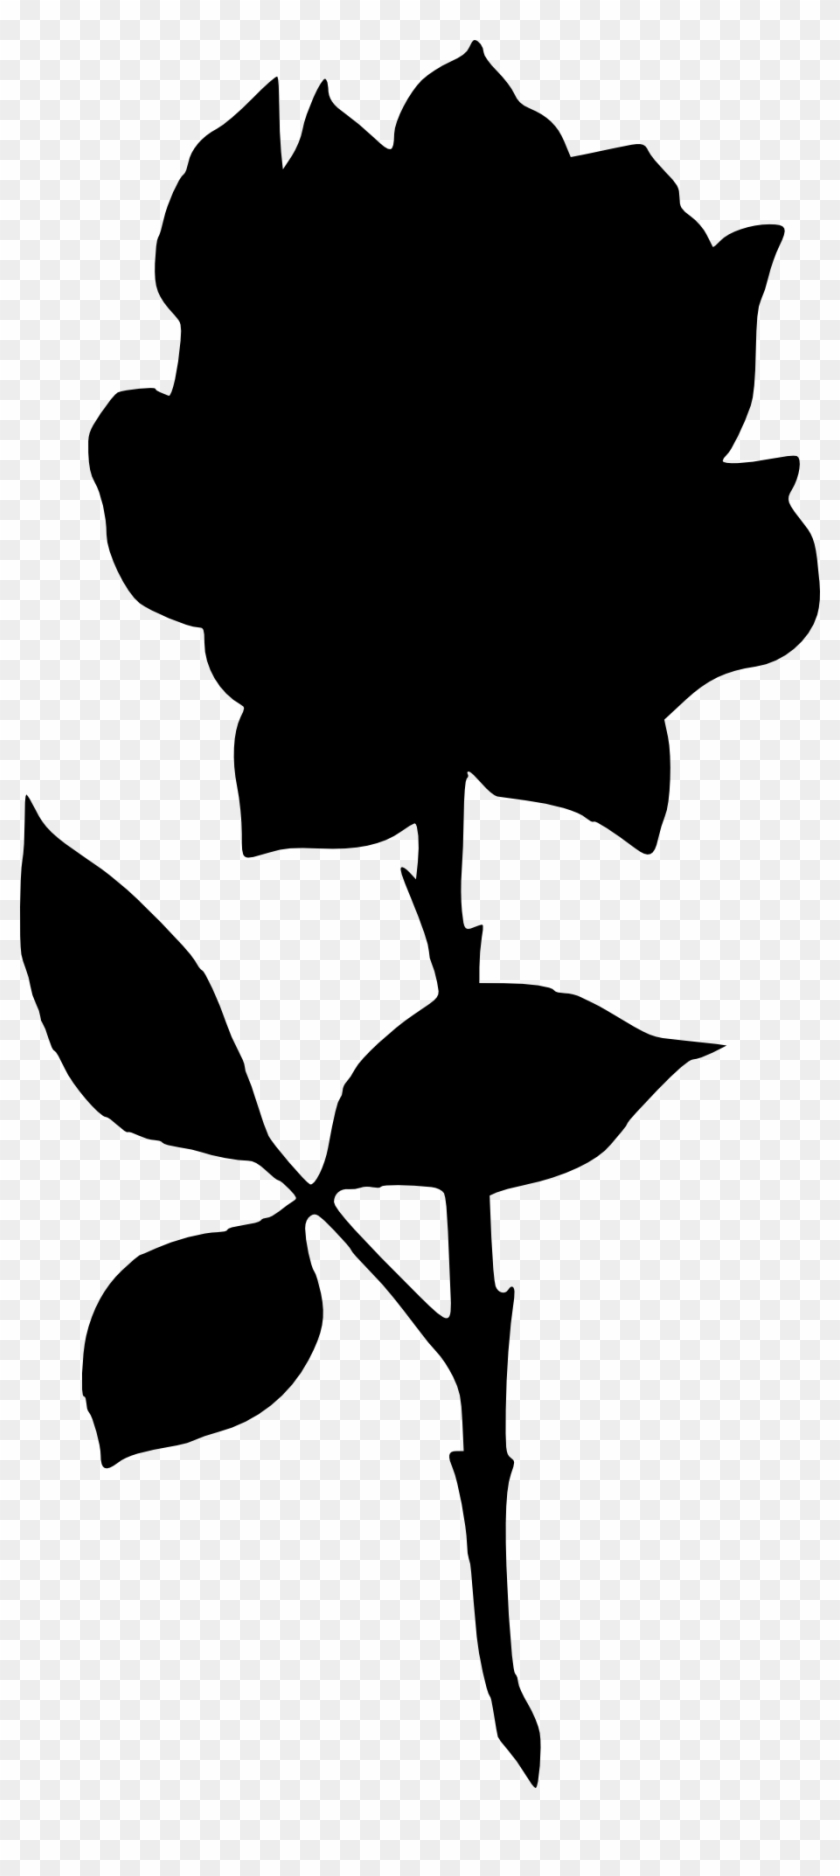 Rose Silhouette Png - Portable Network Graphics #196346